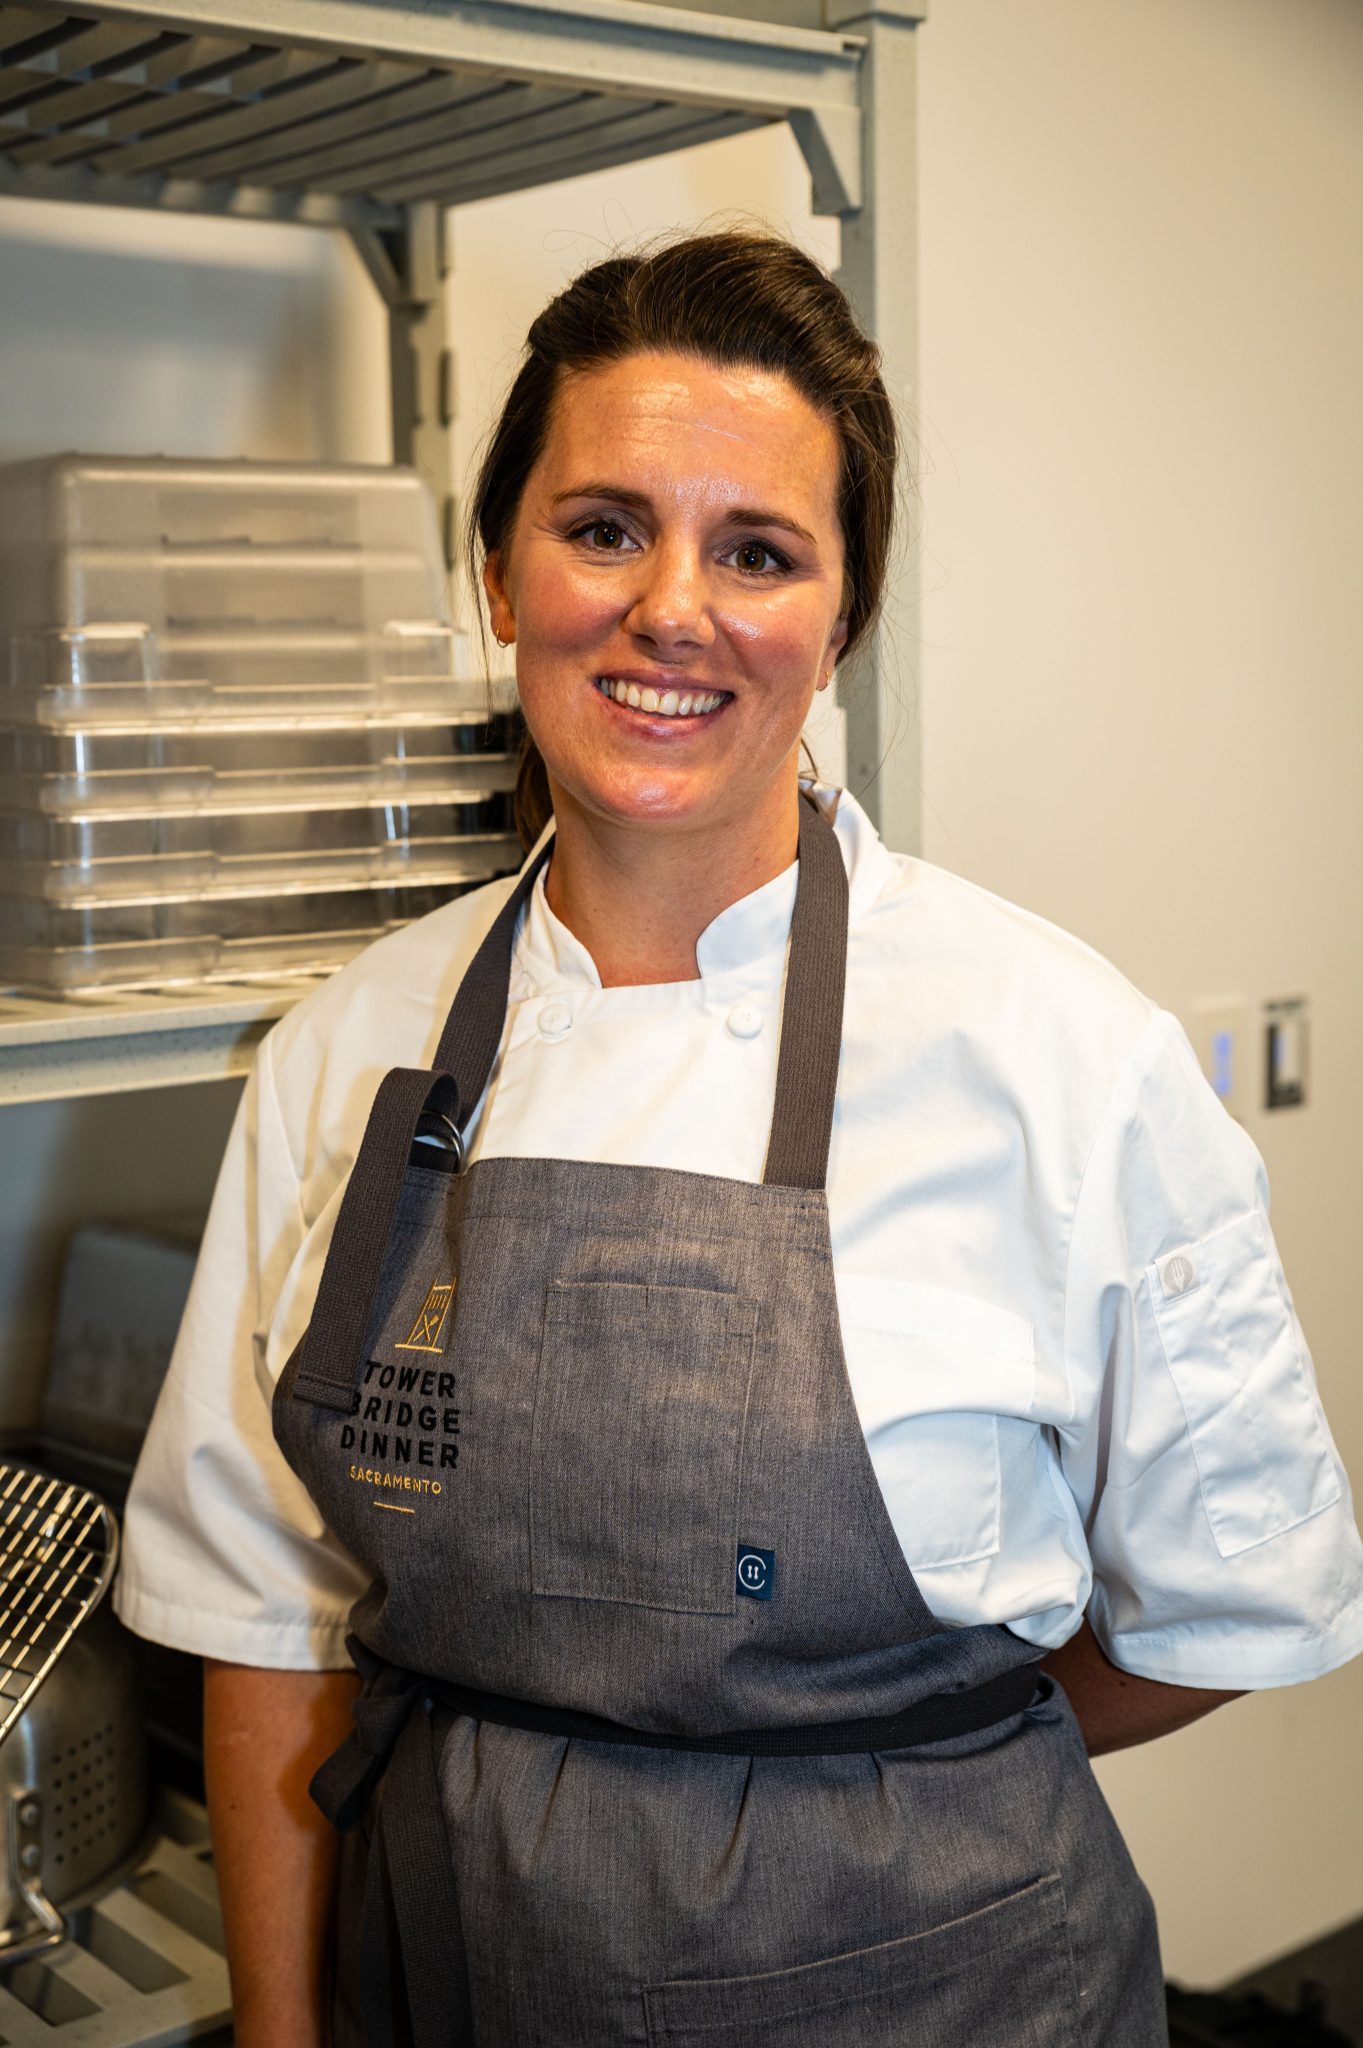 female, chef, unusual, rebecca campbell, Farm to fork festival, sacramento, california, gourmet food, chefs, men and woman, people of color, uniforms, friends, fun, happy, cooks, preview dinner